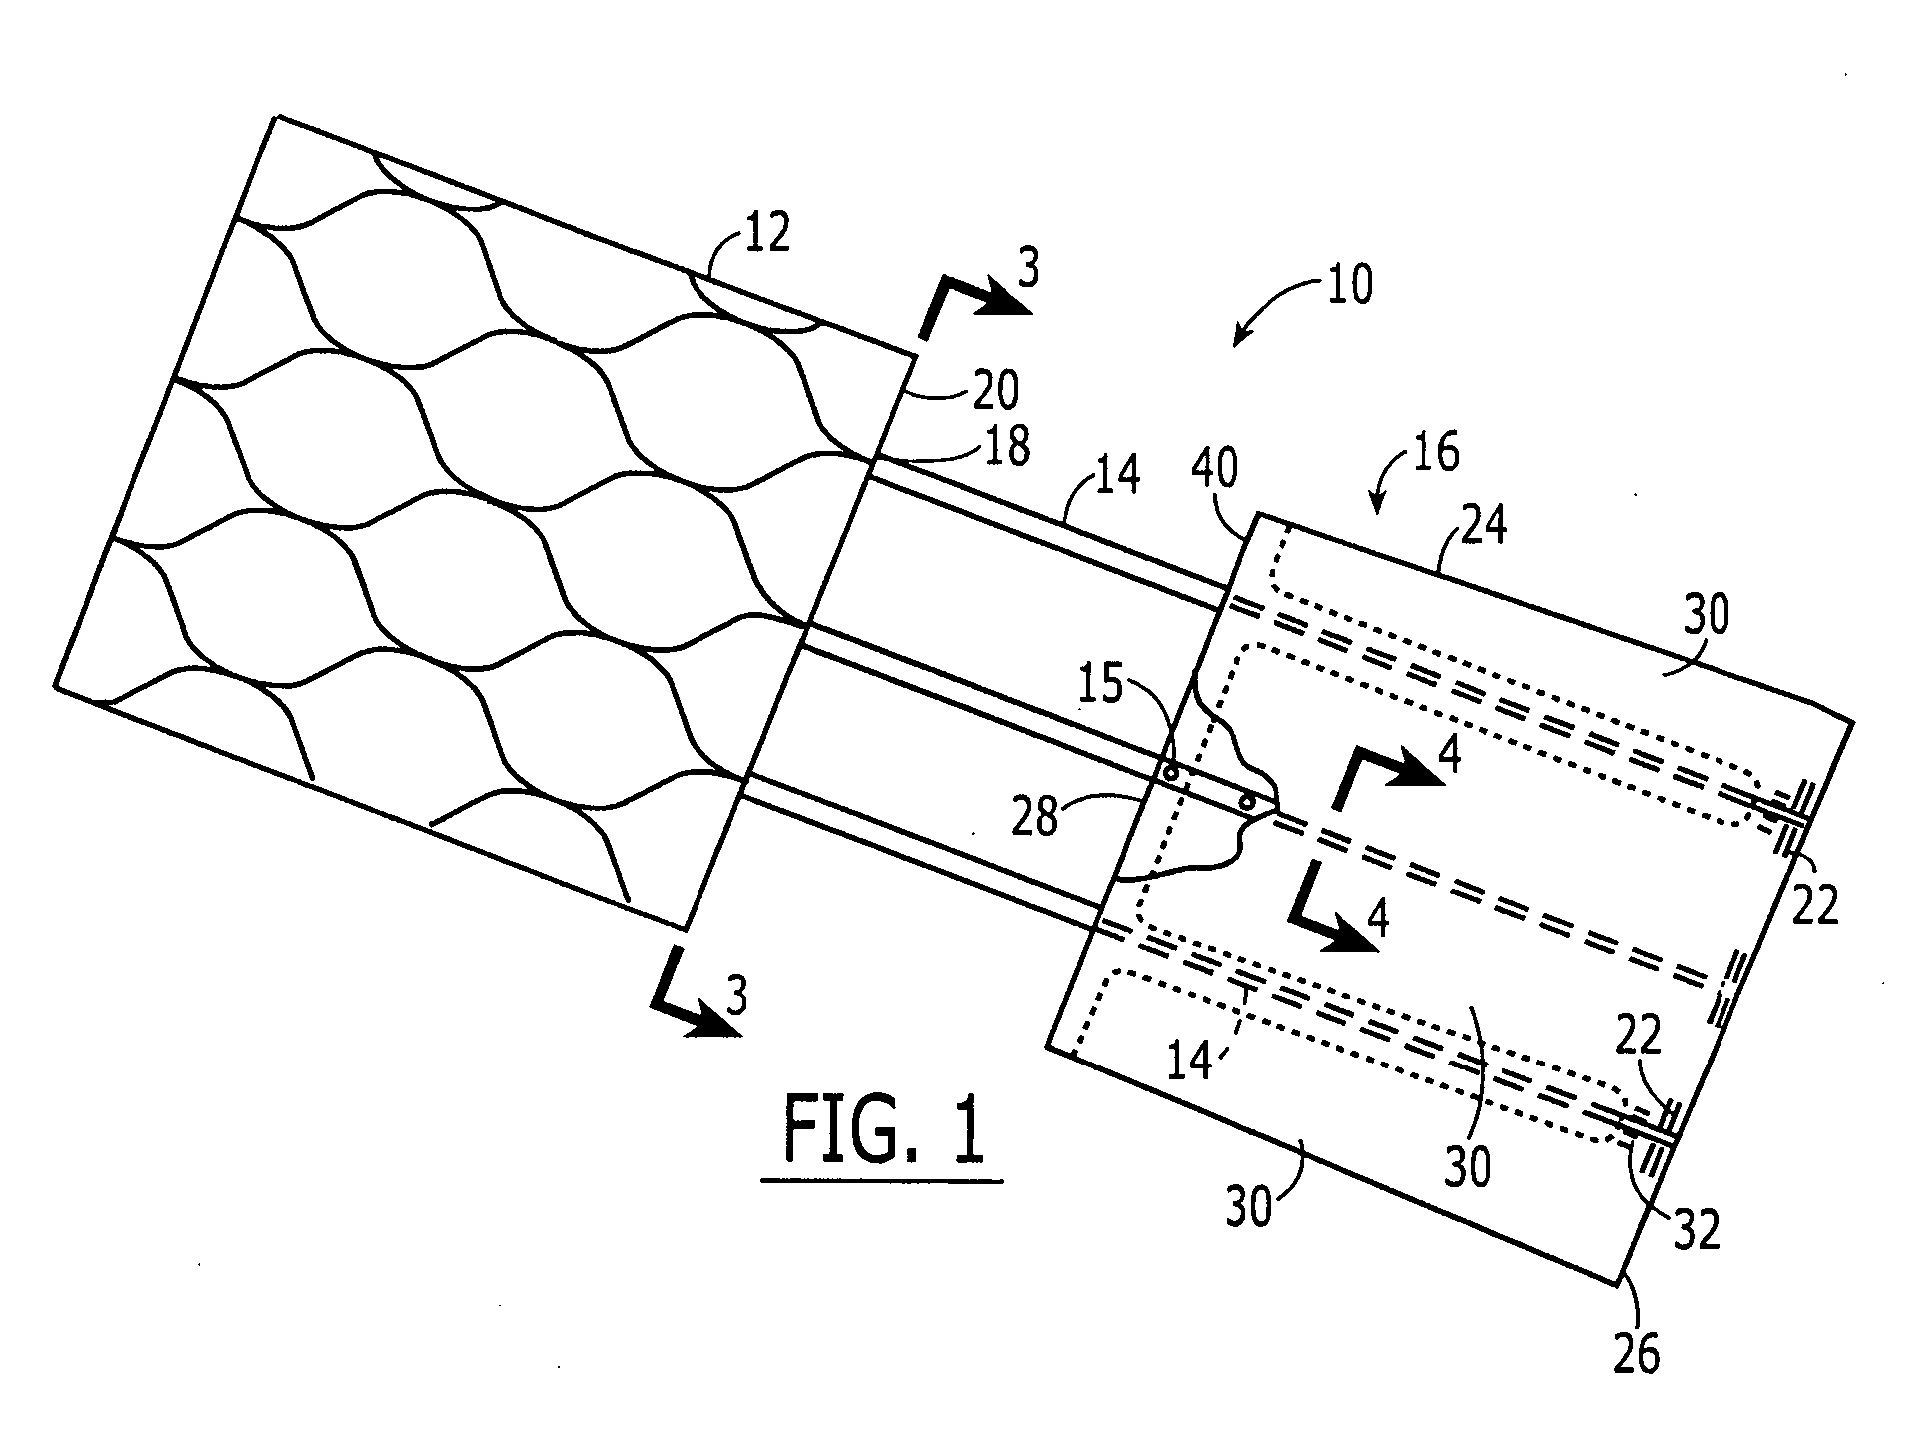 Heart valve and method for insertion of the heart valve into a bodily vessel